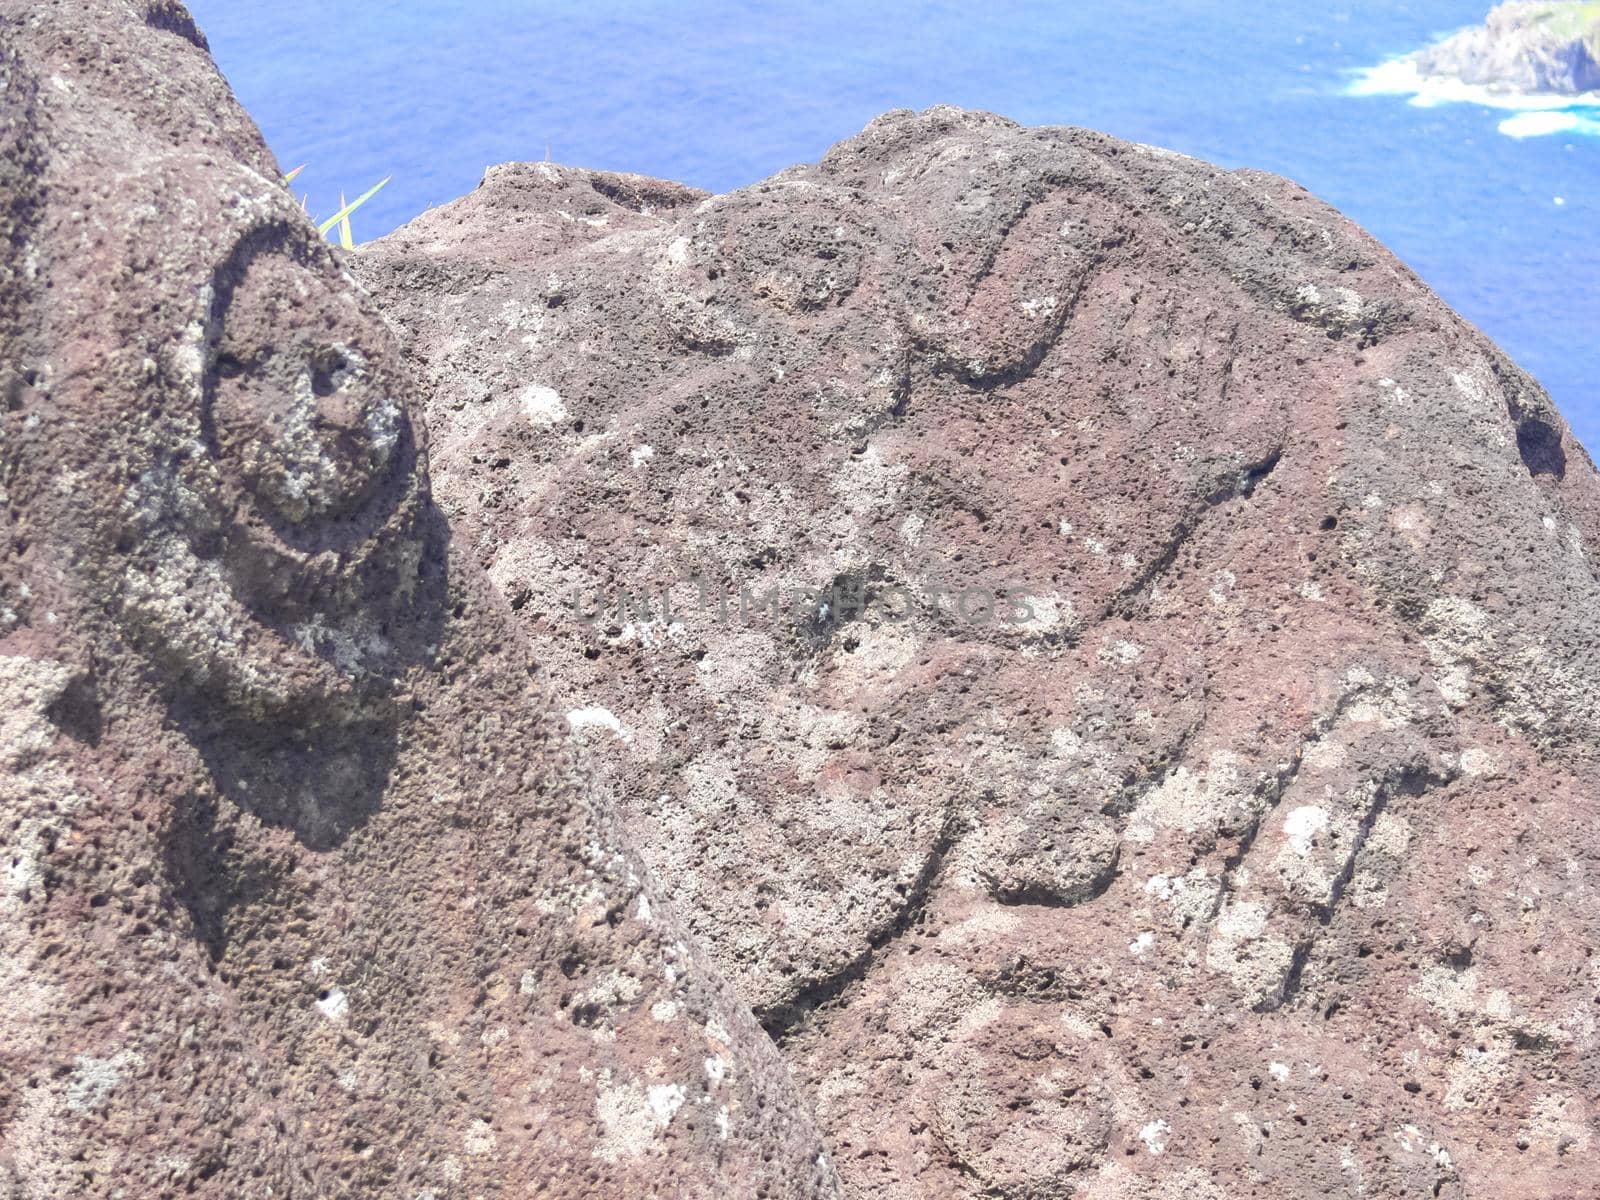 Rocks with rock engraving. Easter Island, traces ancient culture. by DePo